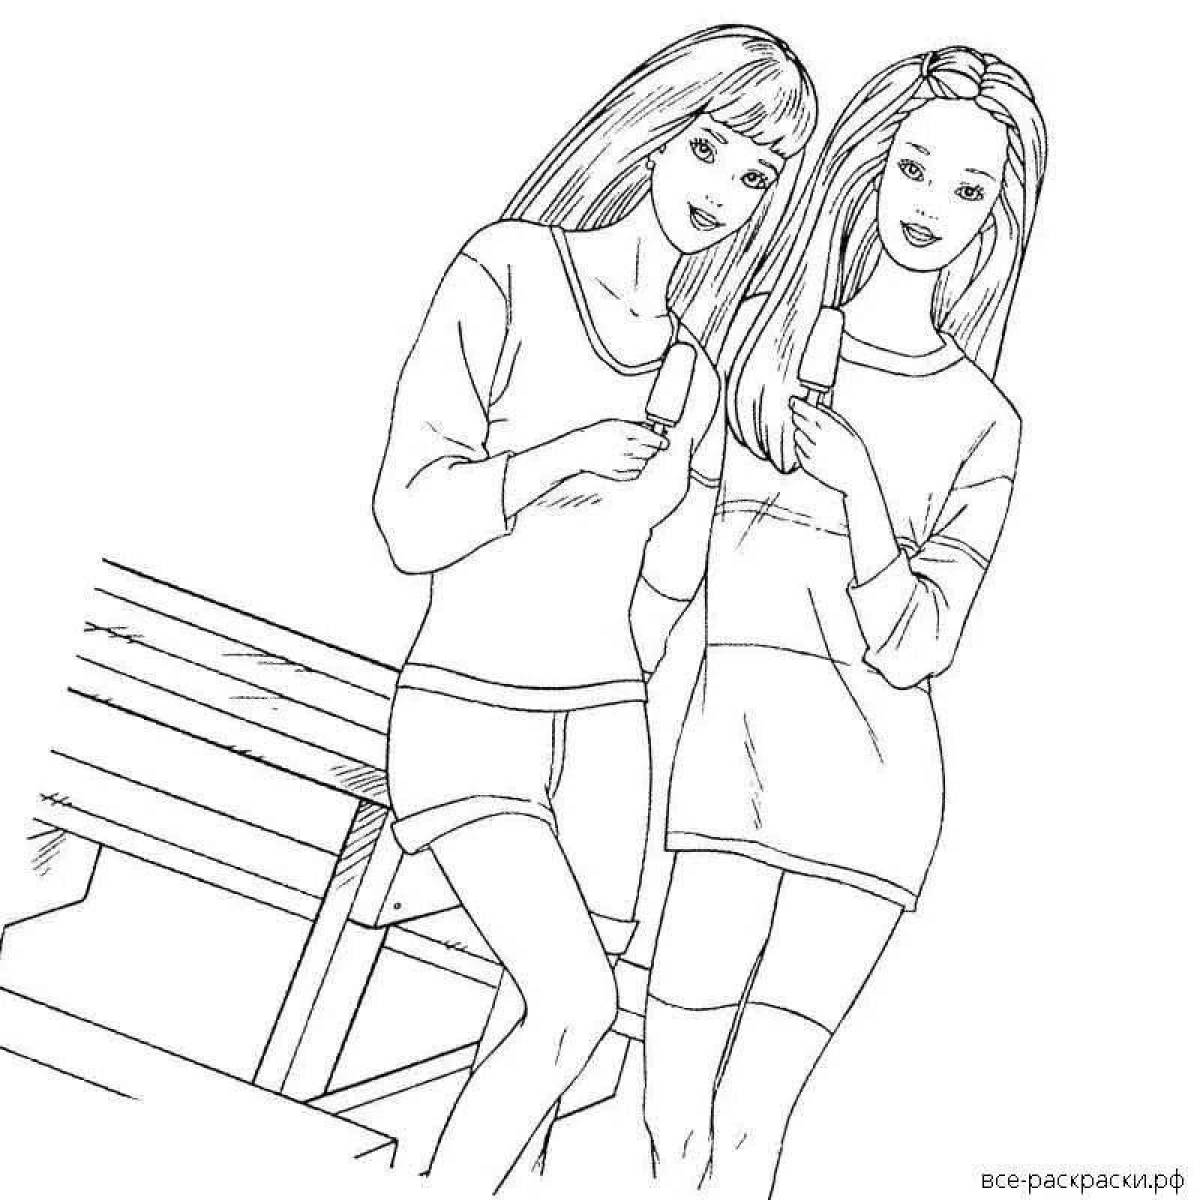 Animated best friends coloring page